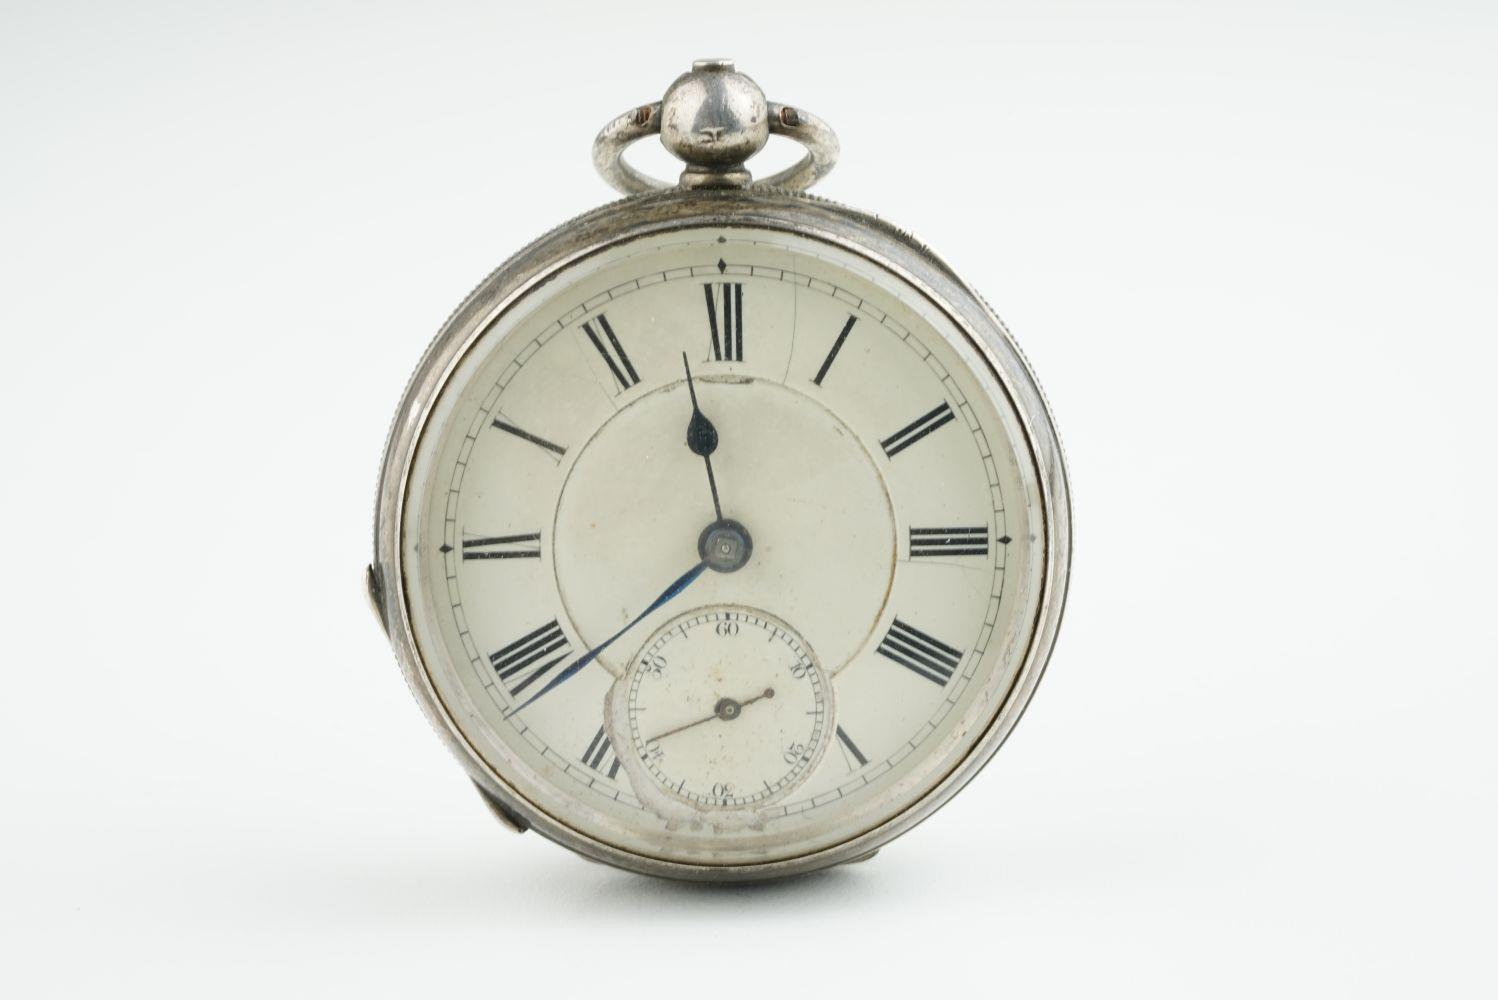 ANTIQUE WALTHAM SILVER POCKET WATCH CIRCA 1885, circular stepped dial with roman numeral hour